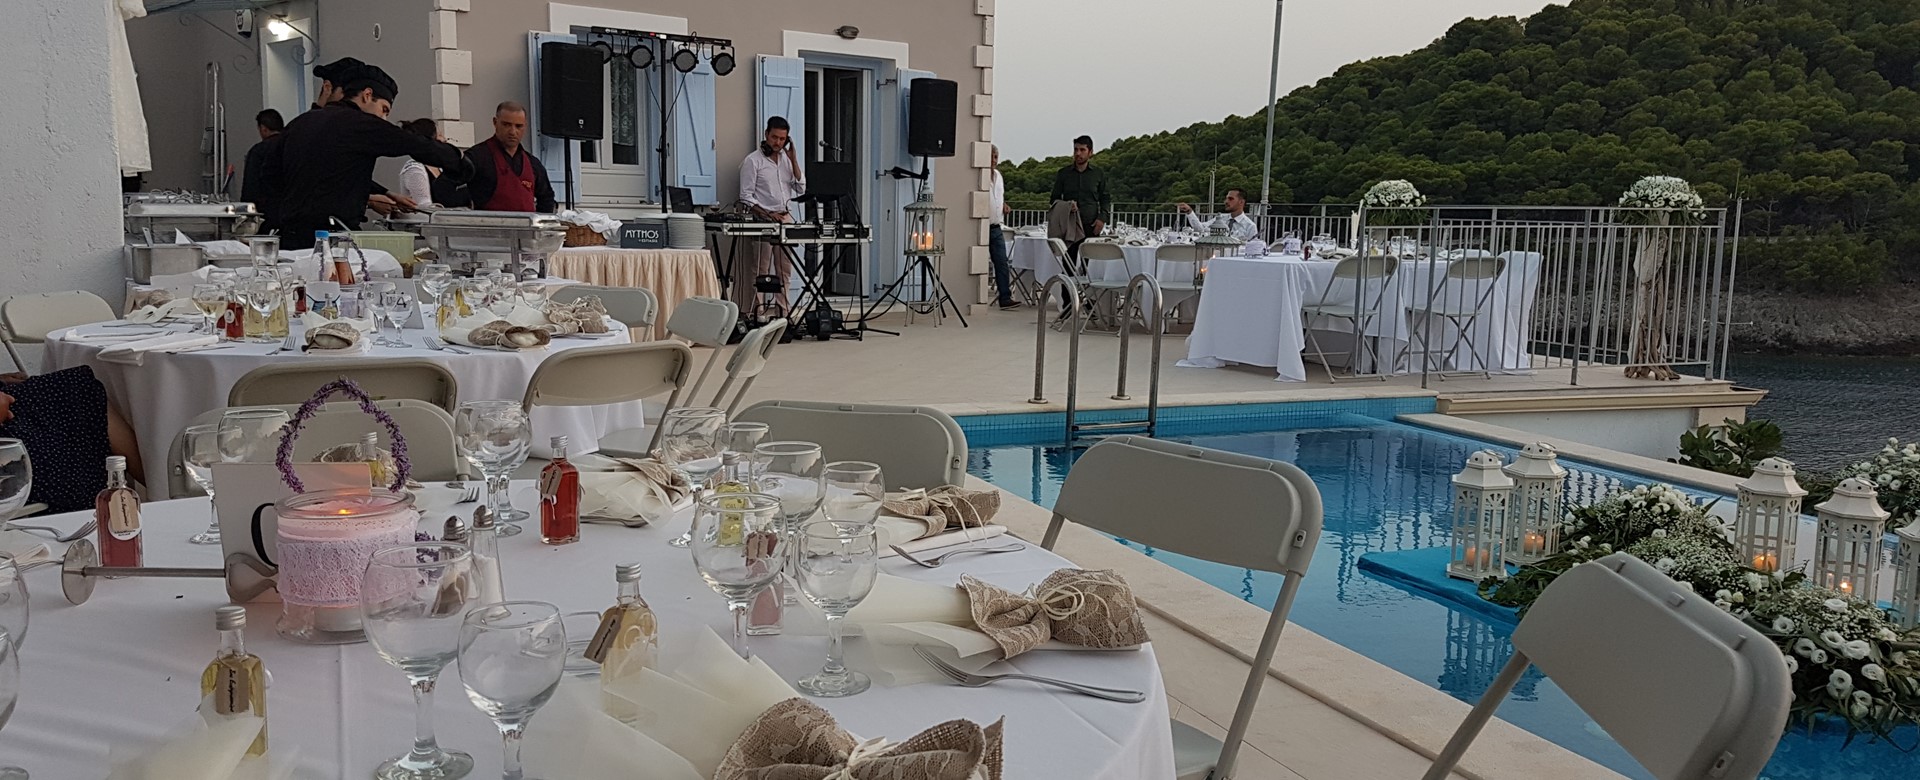 Preparing for the party, DJ, flowers and dining outside at Villa Plori, Assos, Kefalonia